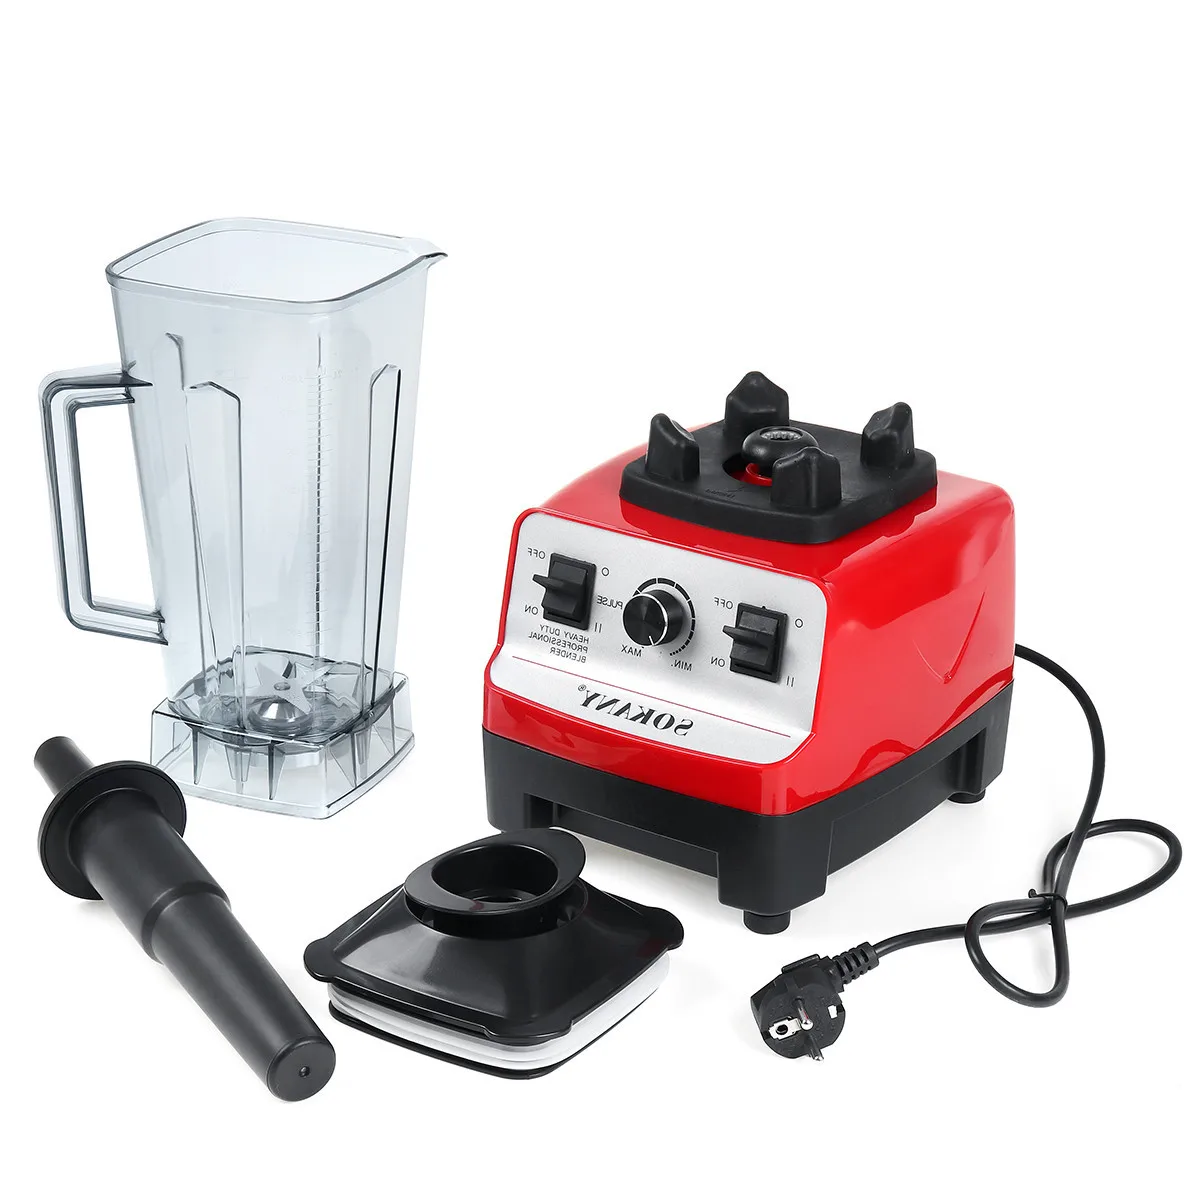 https://ae01.alicdn.com/kf/S2c38e56e113c42c7a703ada741df8ce4S/Professional-2L-Countertop-Blender-with-4500-Watt-Base-and-Total-Crushing-Technology-for-Smoothies-Ice-and.jpg